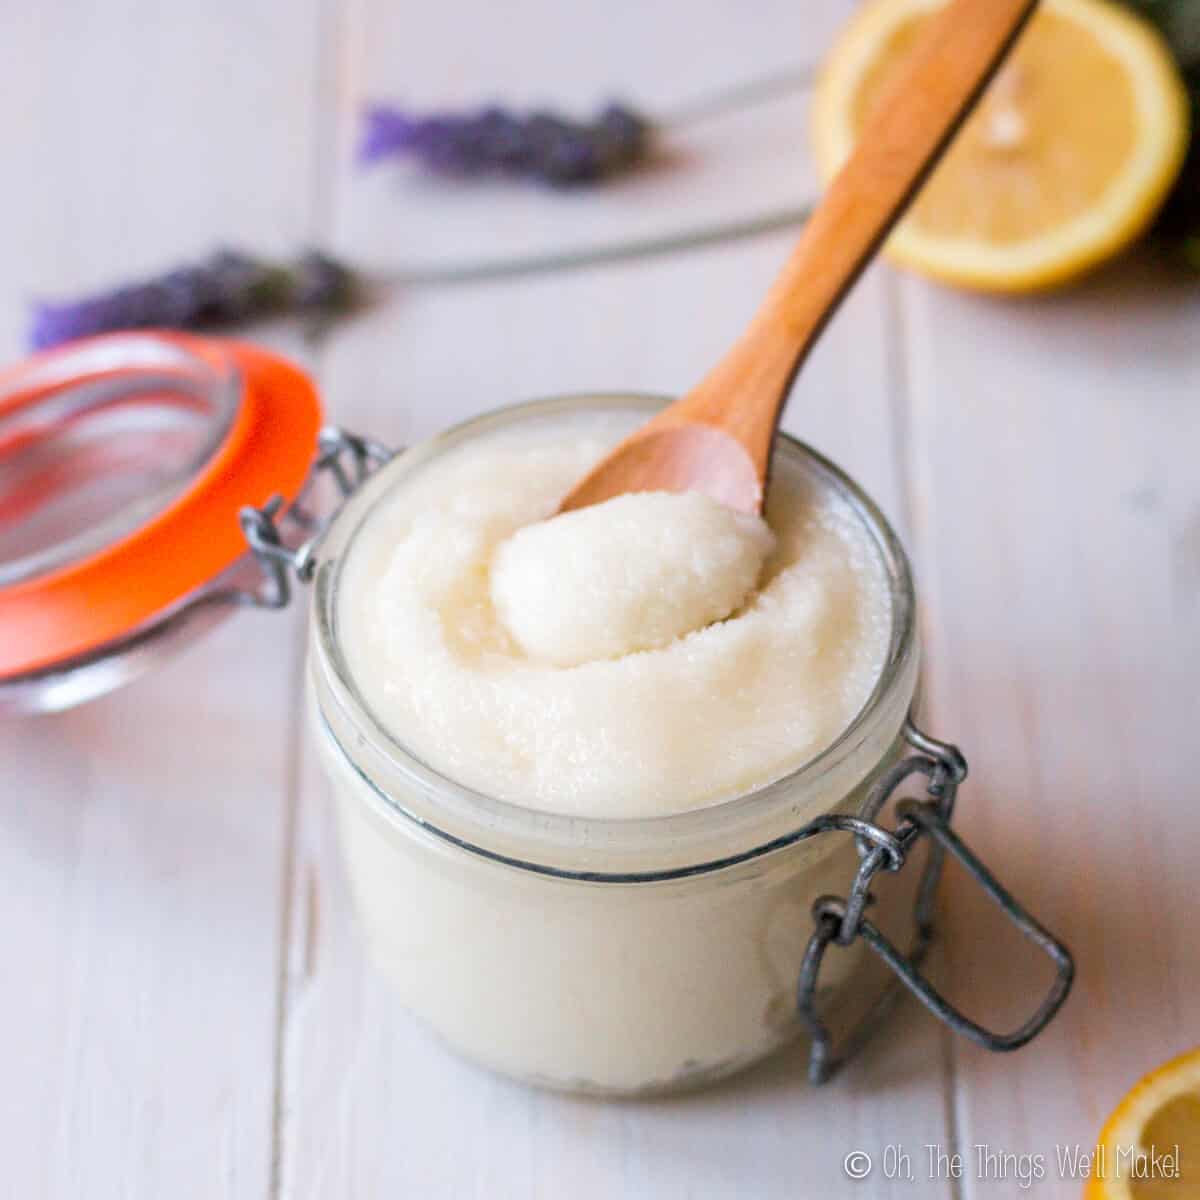 A small glass jar filled with an emulsified sugar scrub with a wooden spoon in it.